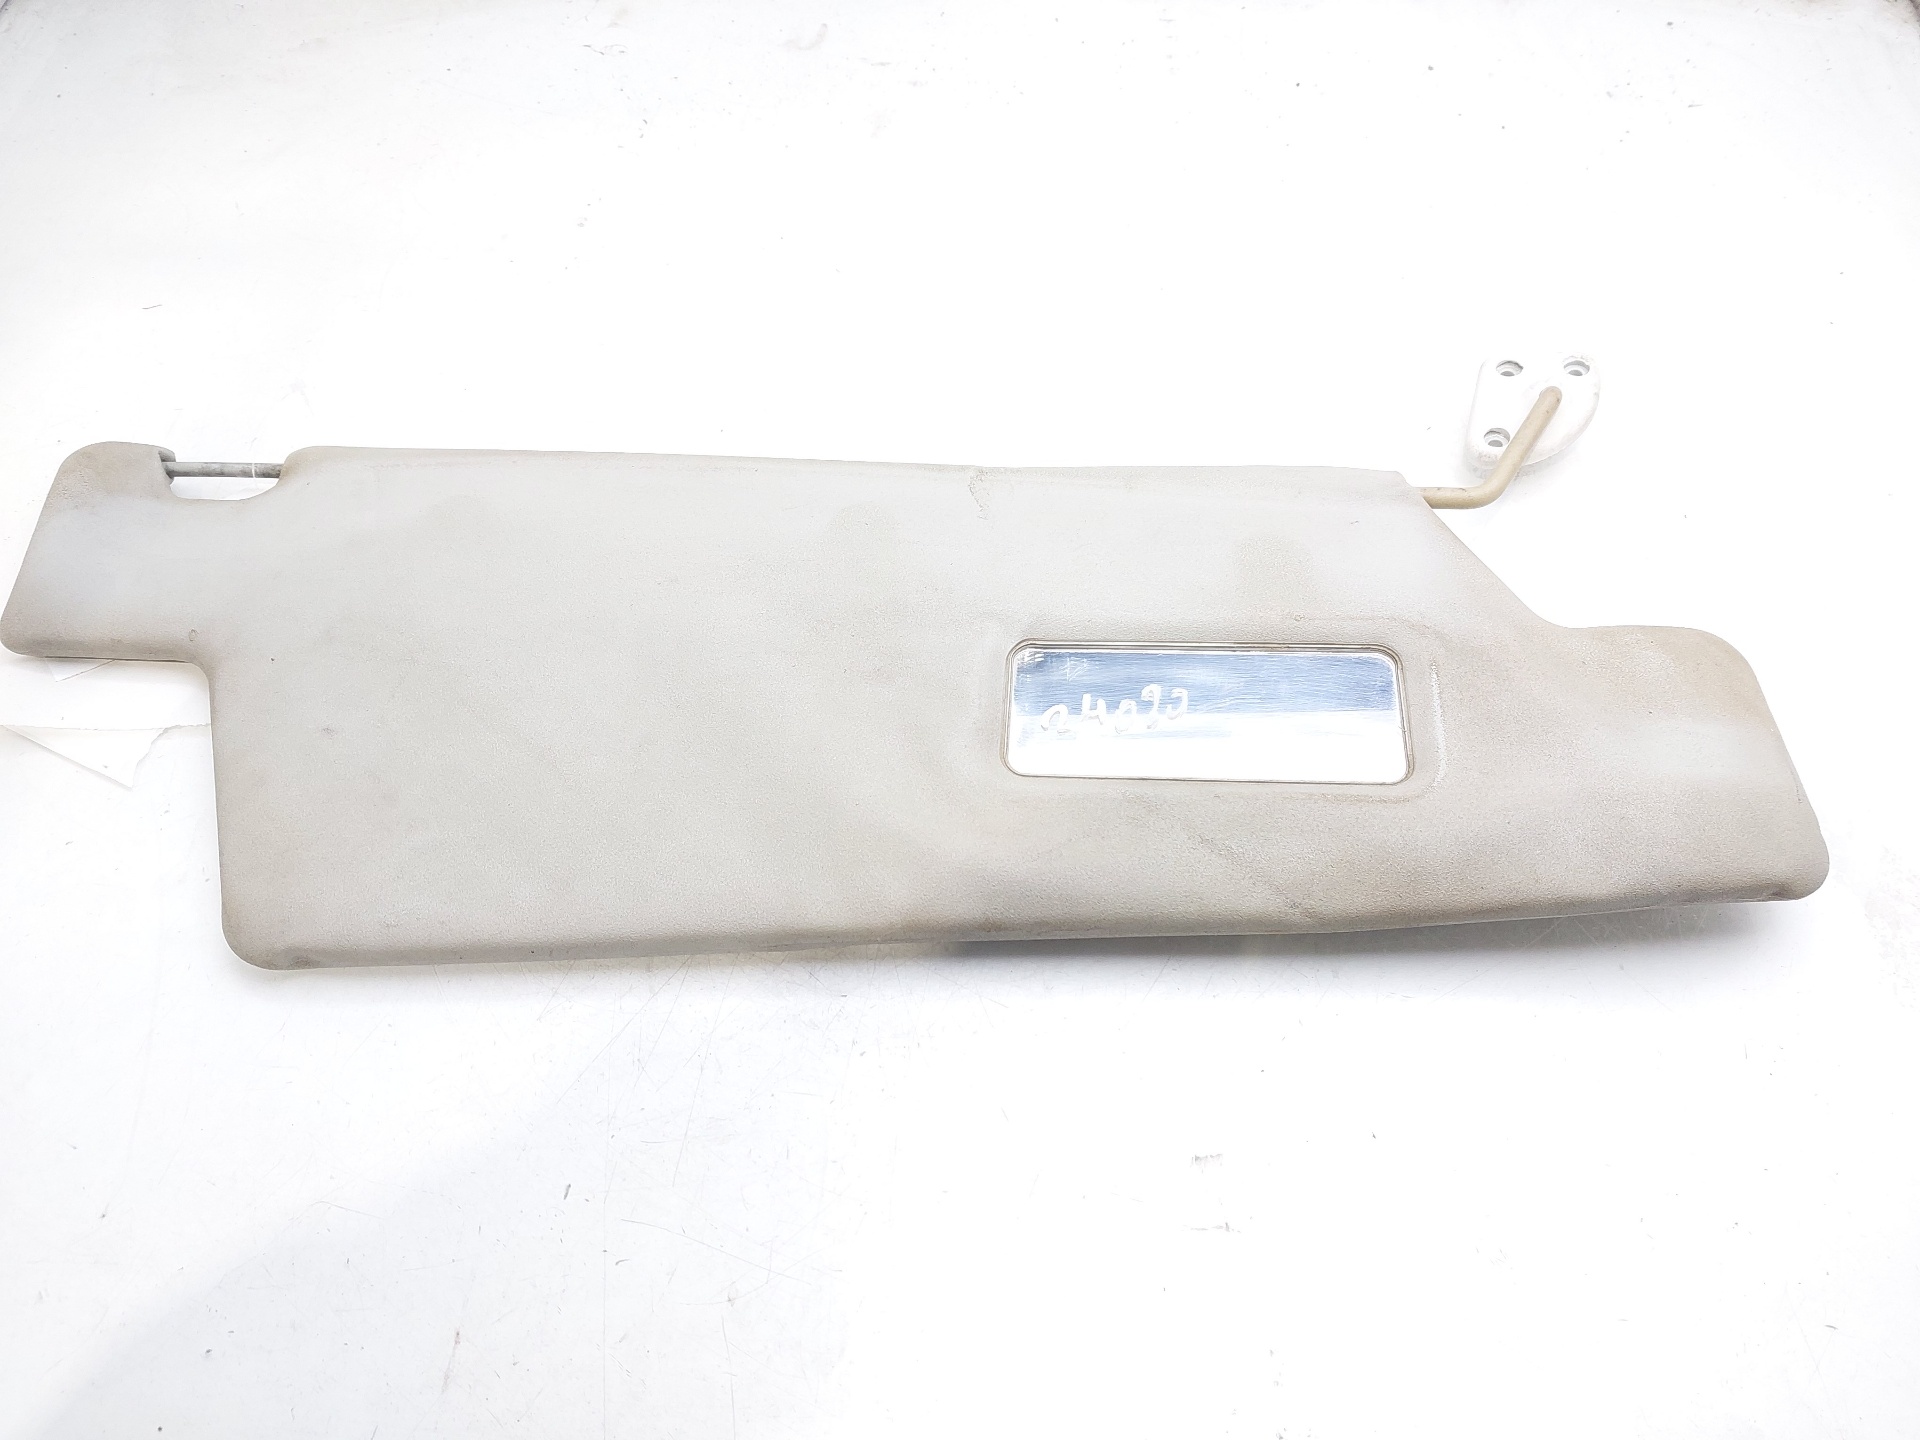 LAND ROVER Discovery 1 generation (1989-1997) Right Side Sun Visor STC4753 25059634